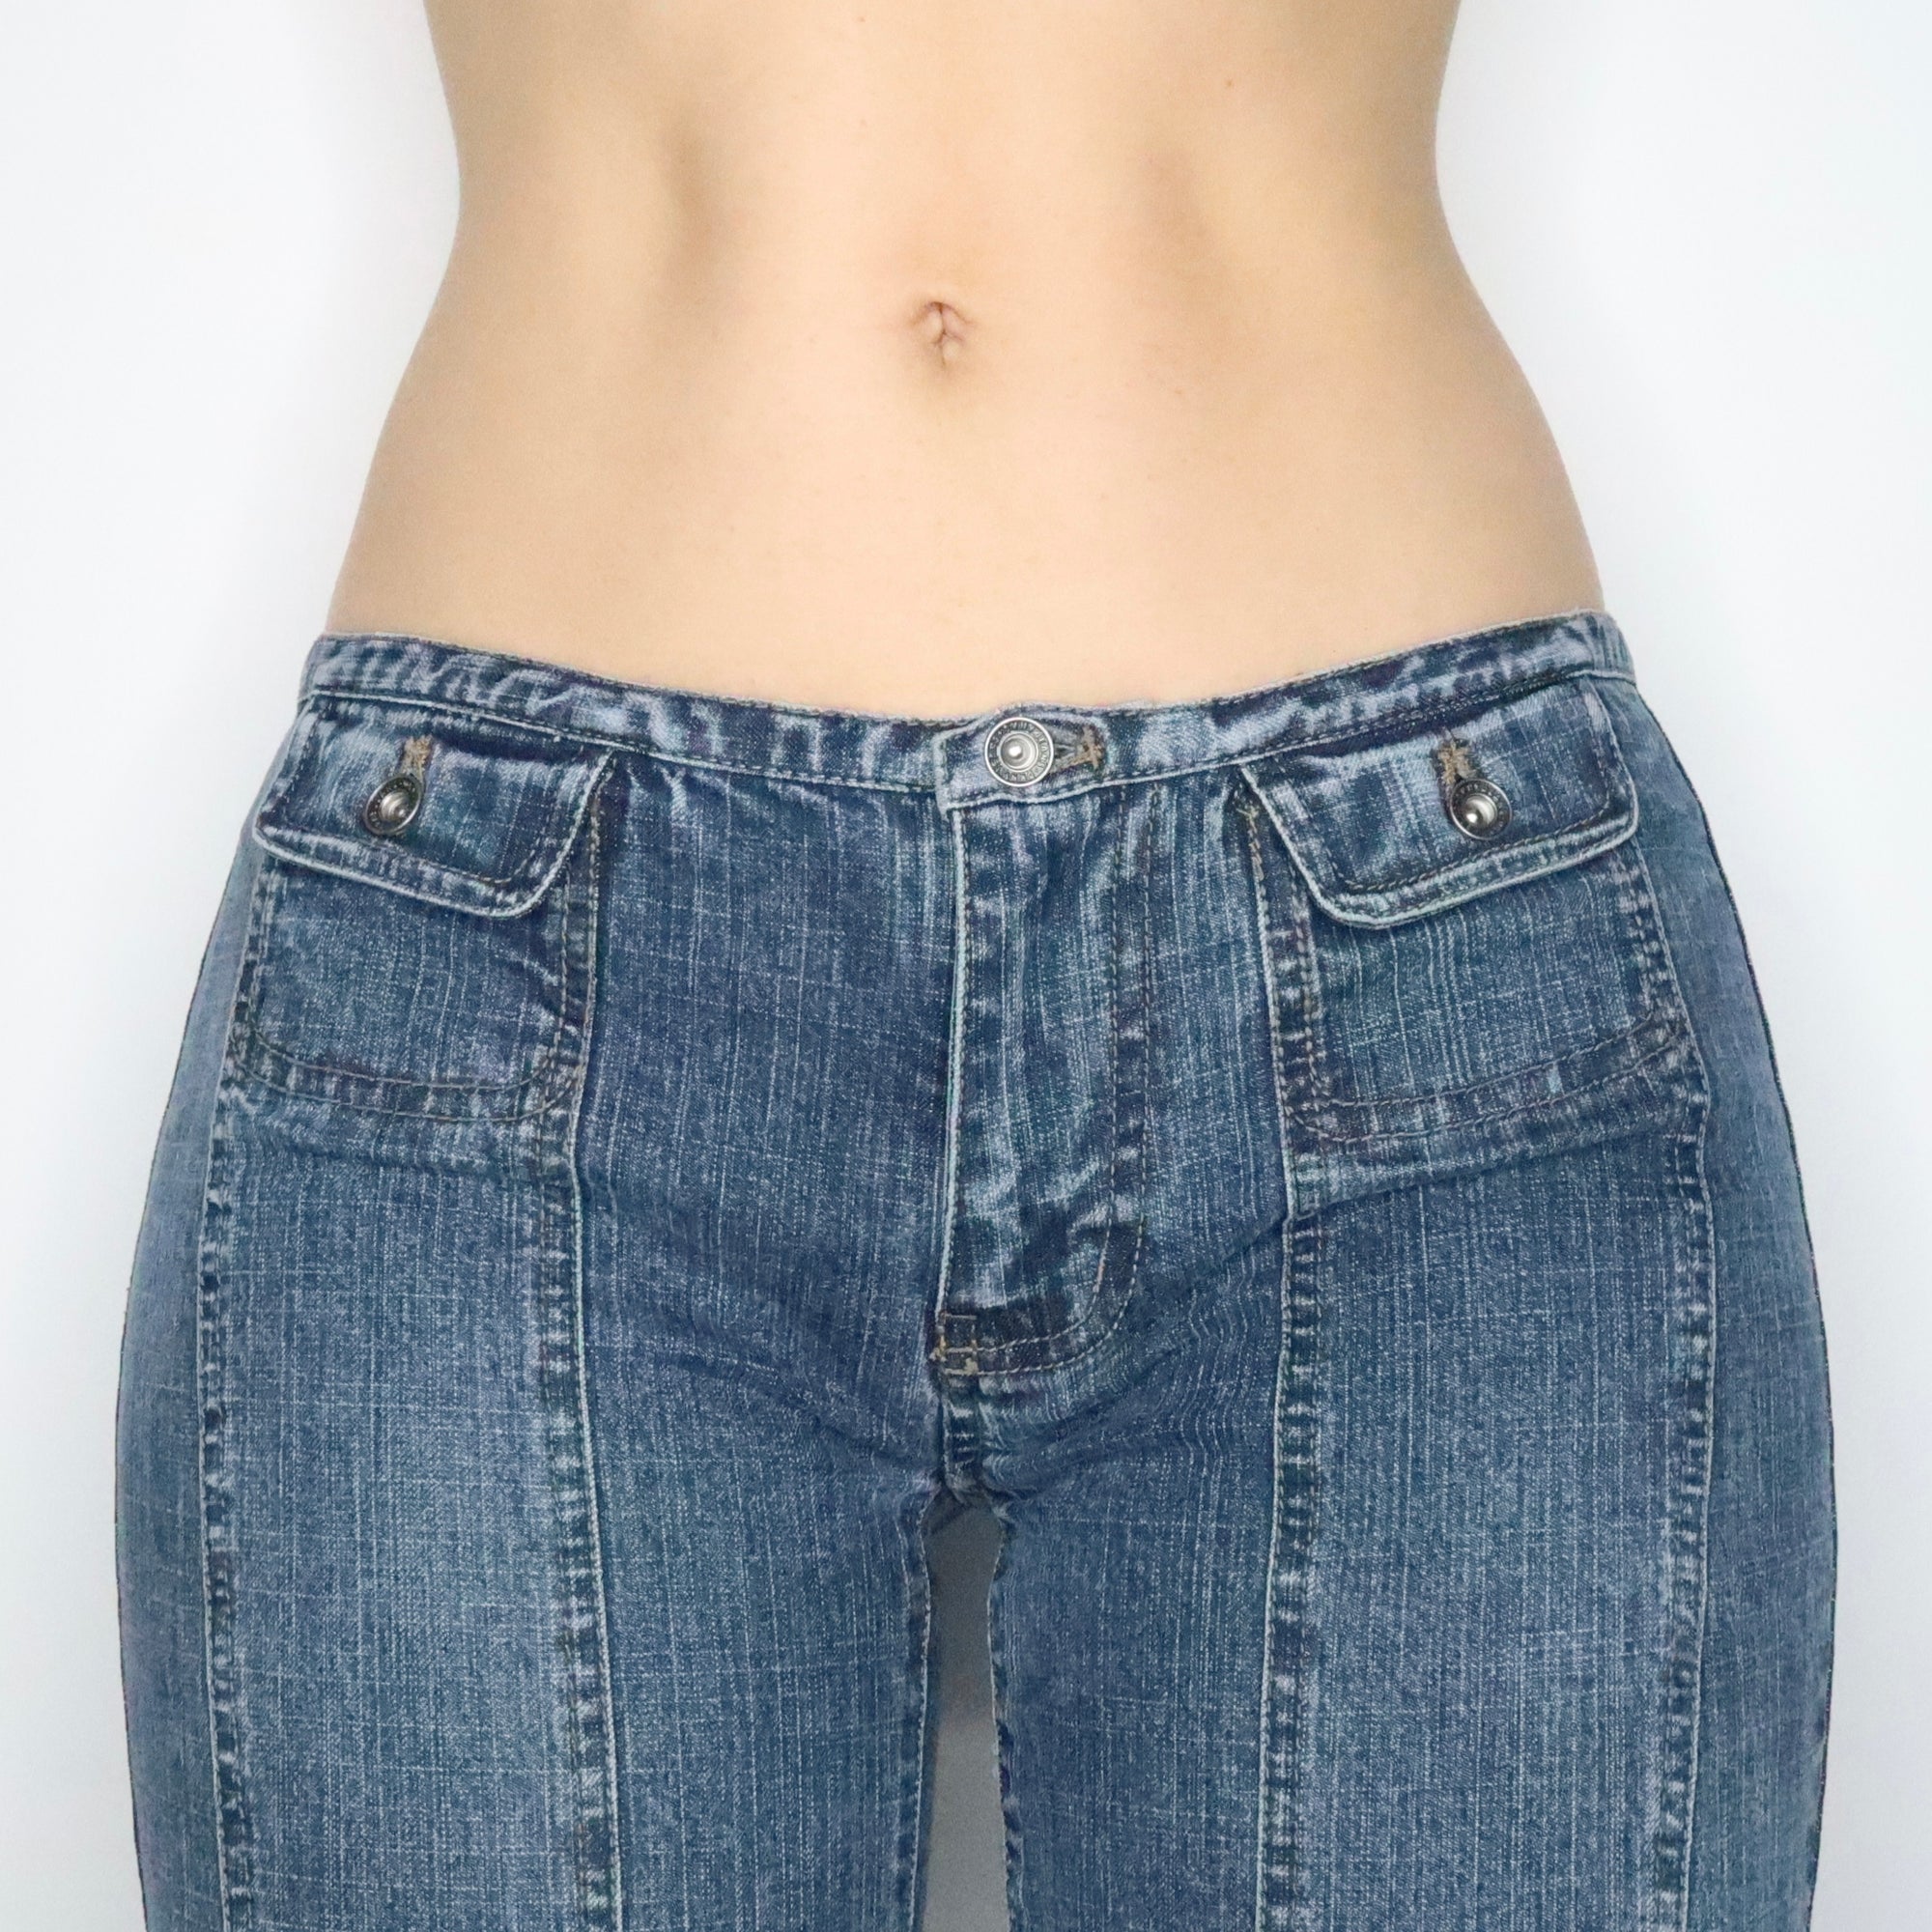 DKNY Low Rise Jeans (Small) - Imber Vintage